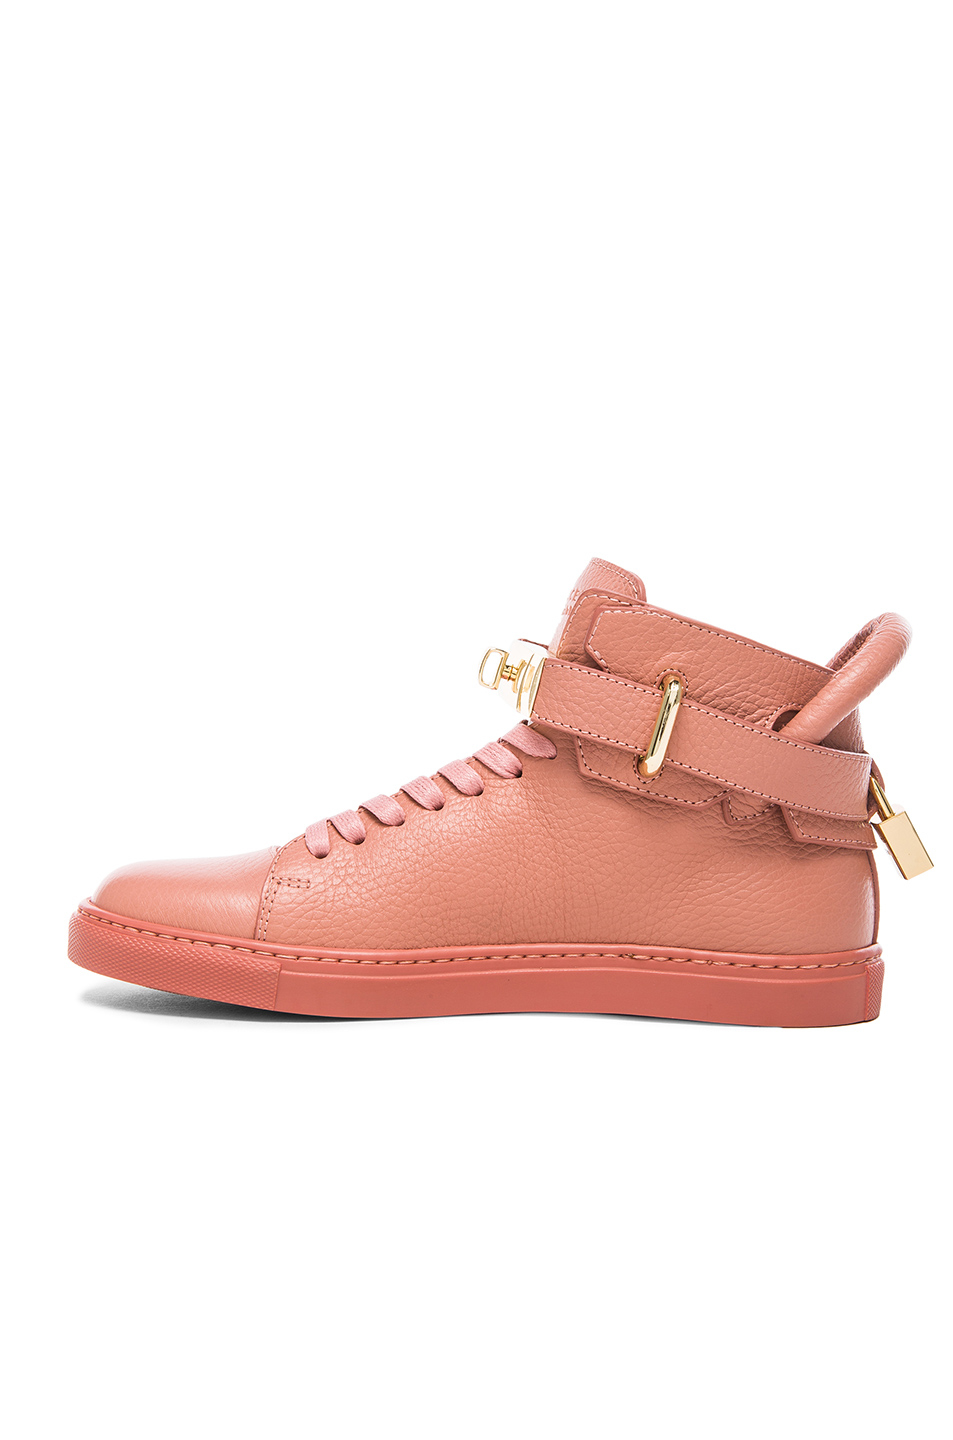 Buscemi 100mm Leather Sneakers in Pink - Lyst